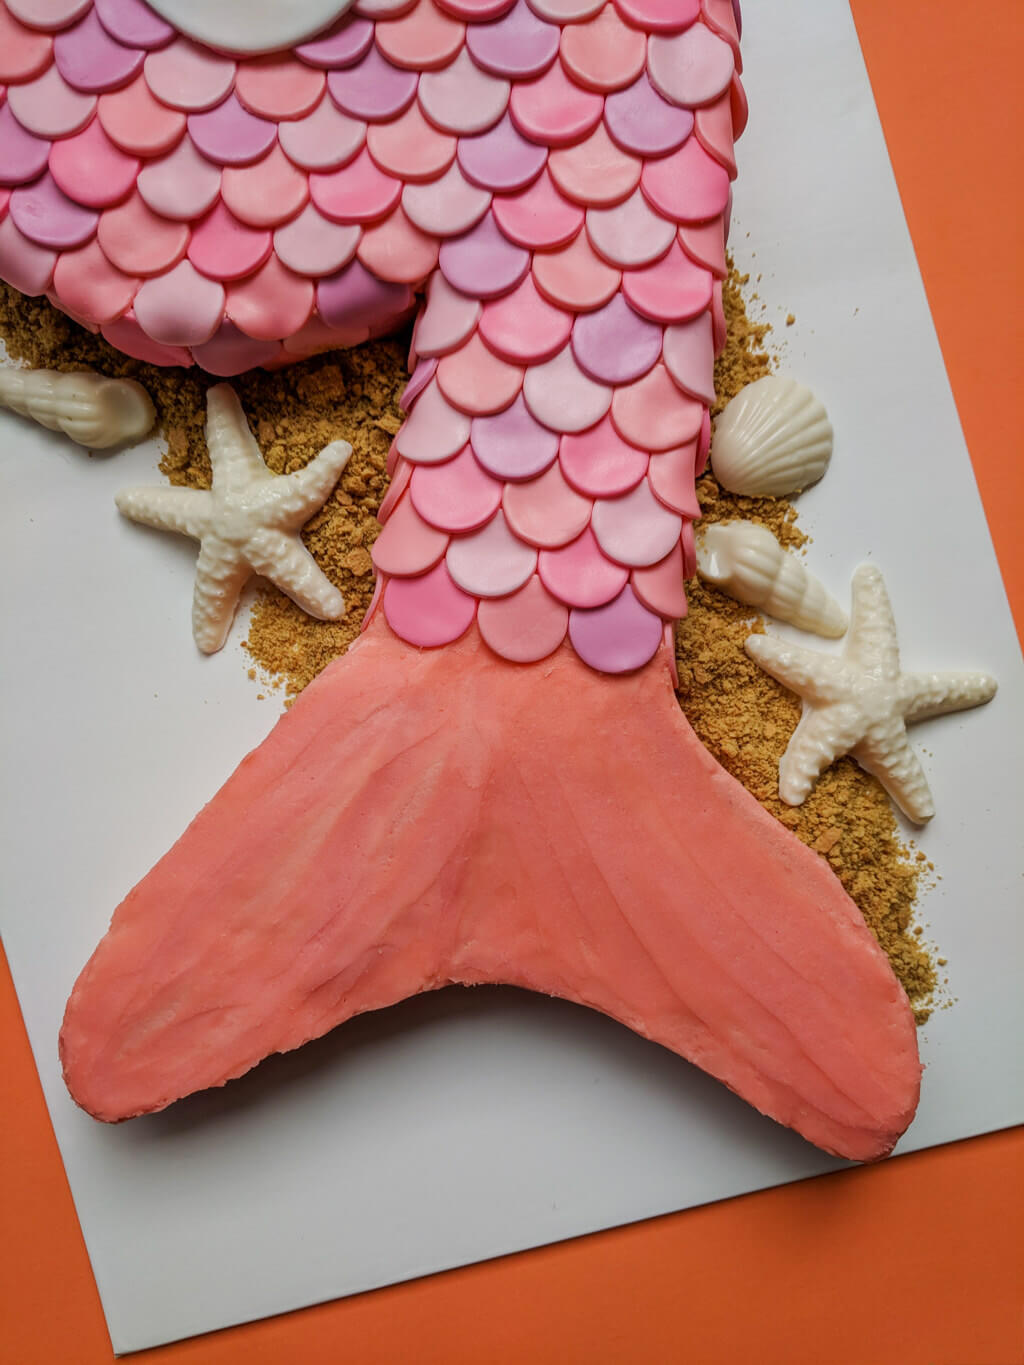 Mermaid cake with tail and chocolate shells